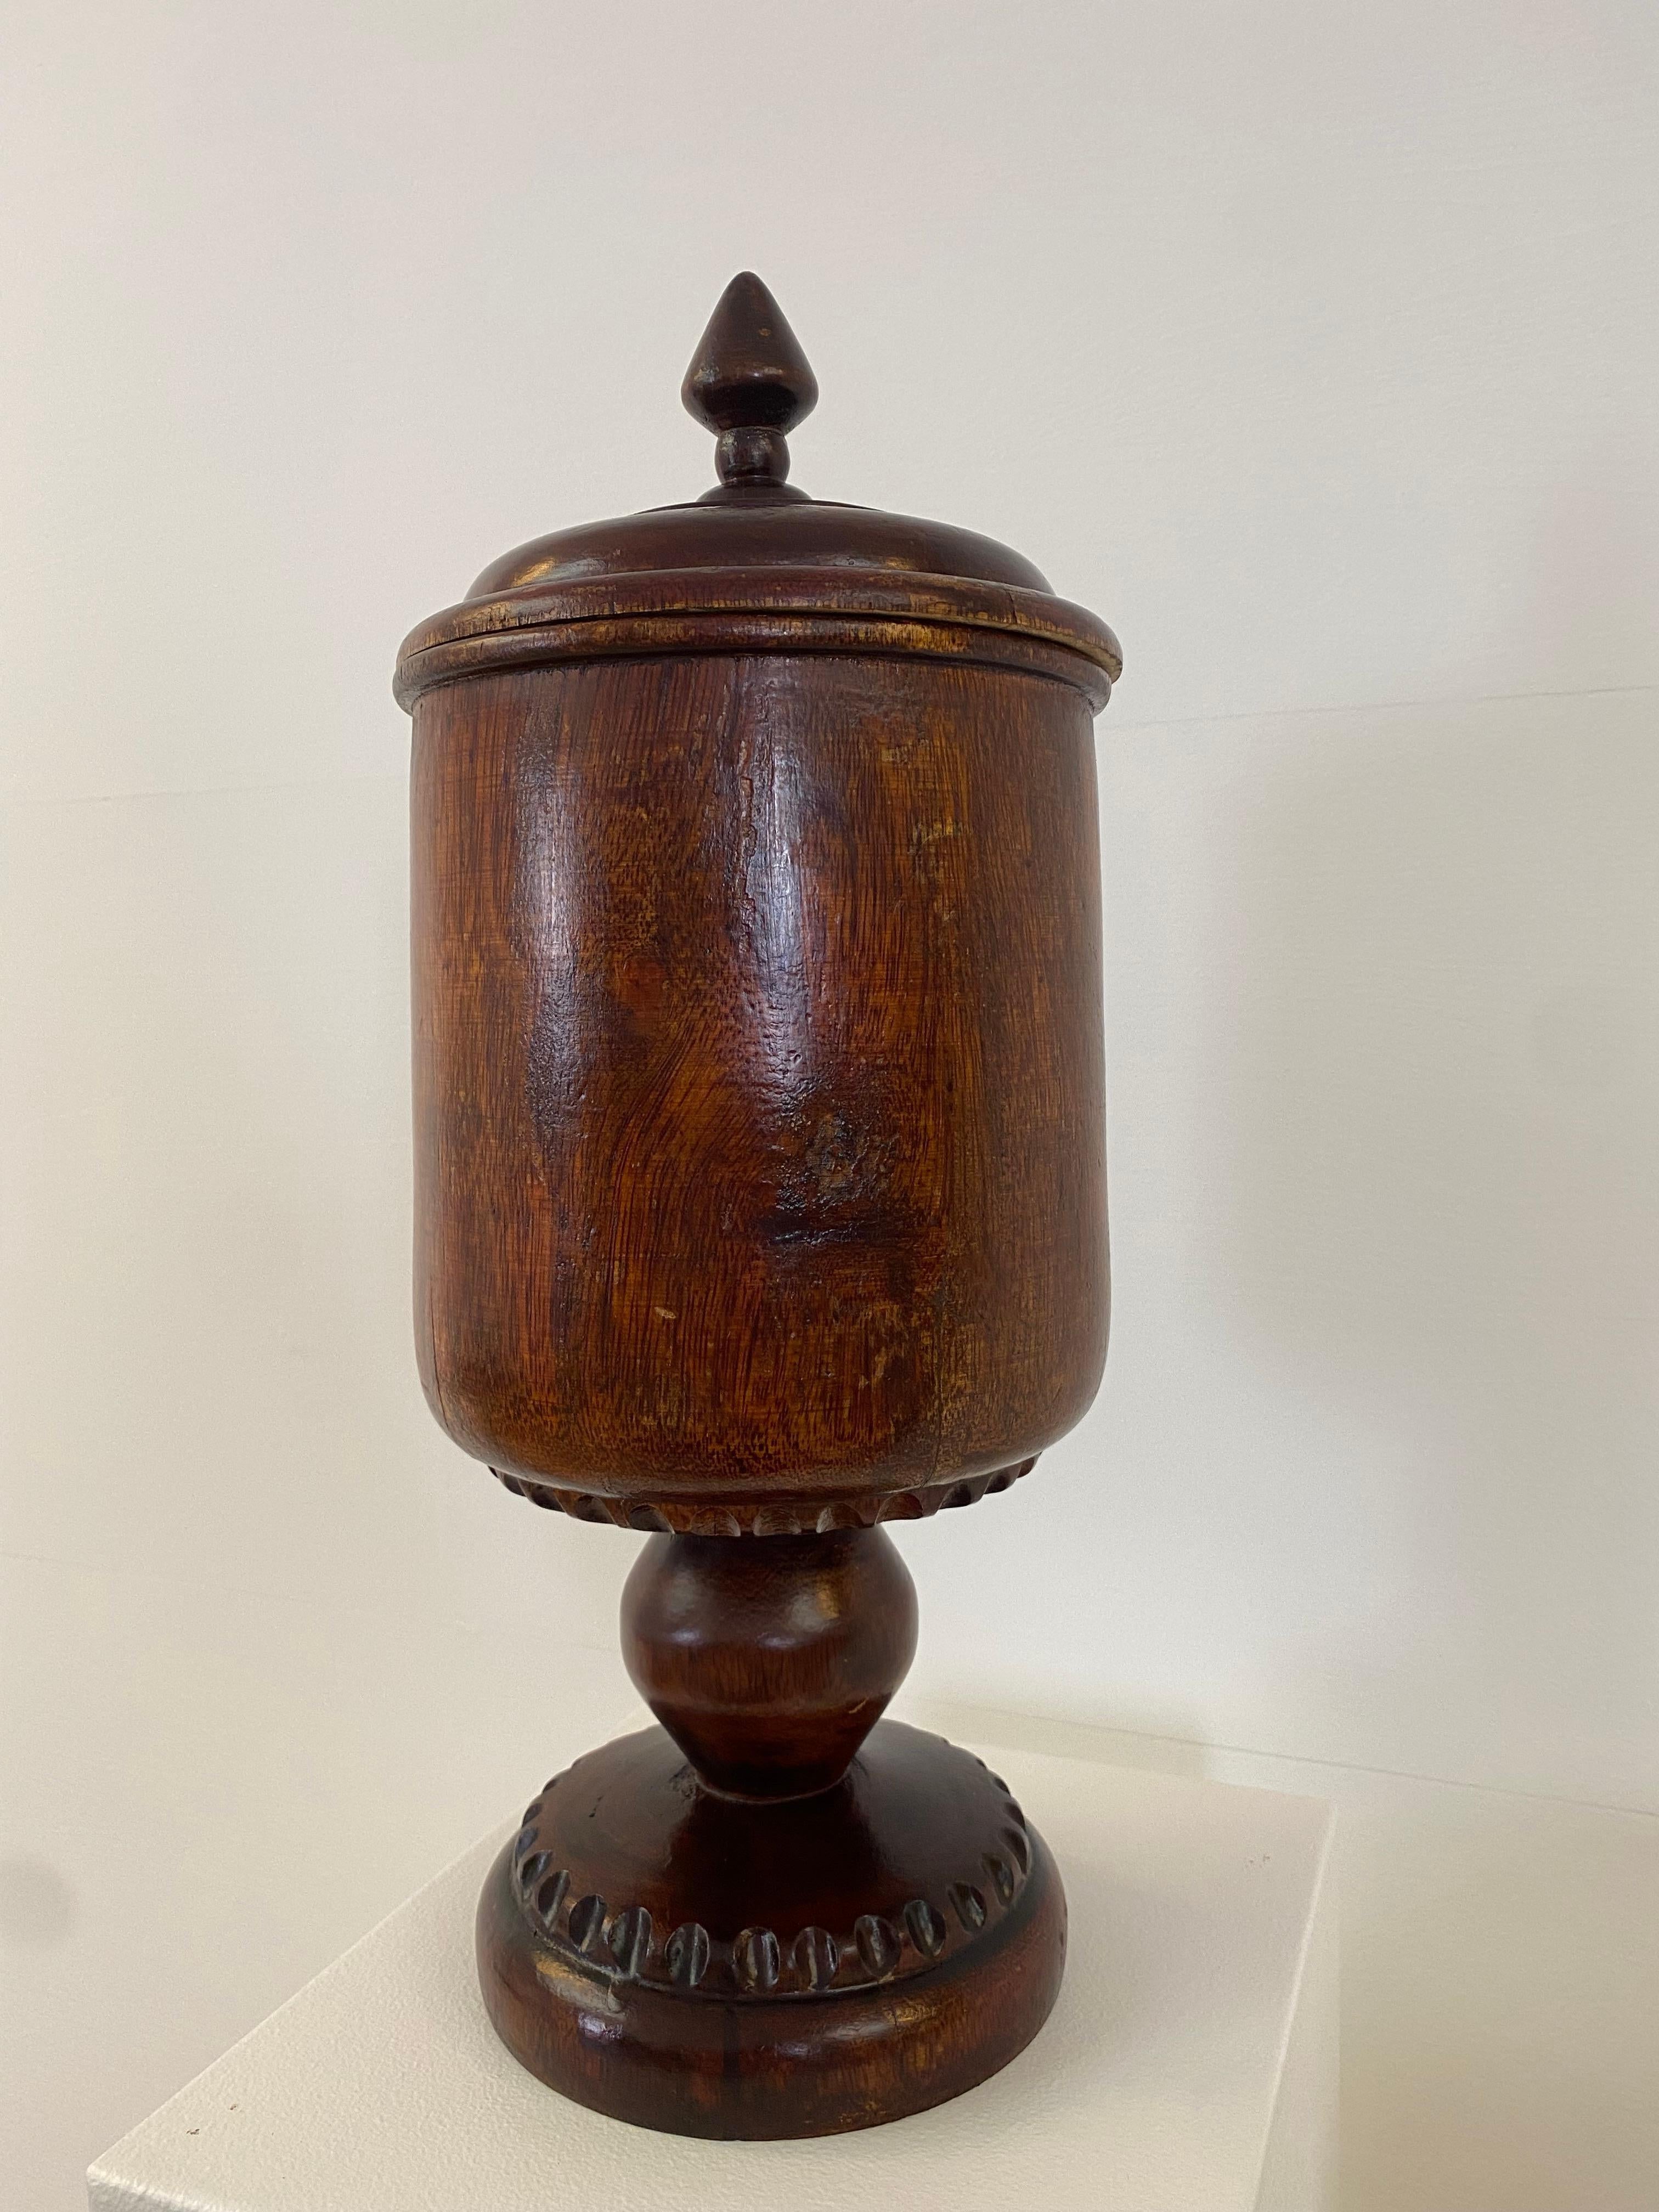 Exceptional big Italian Pharmacy pot with cover from Tuscany,Italy,
elegant object with few decorations, good old patina and warm finish of the wood, used to put healing herbs and plants,
very decorative object.